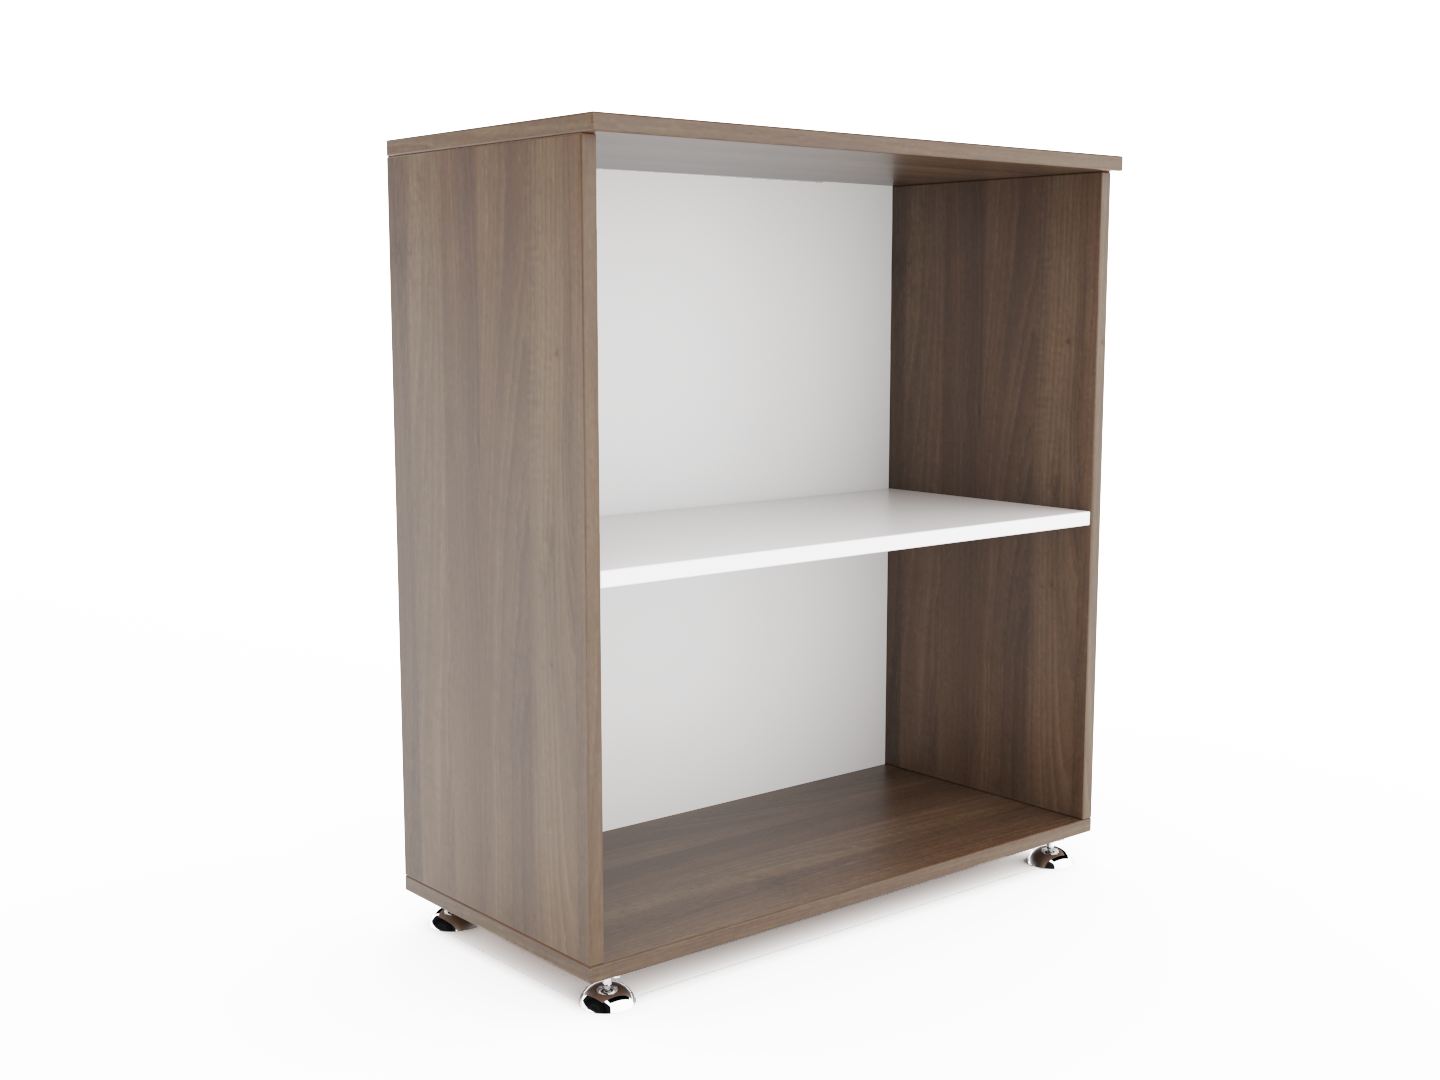  Open  Cabinet  Rosewood Workspace Solutions